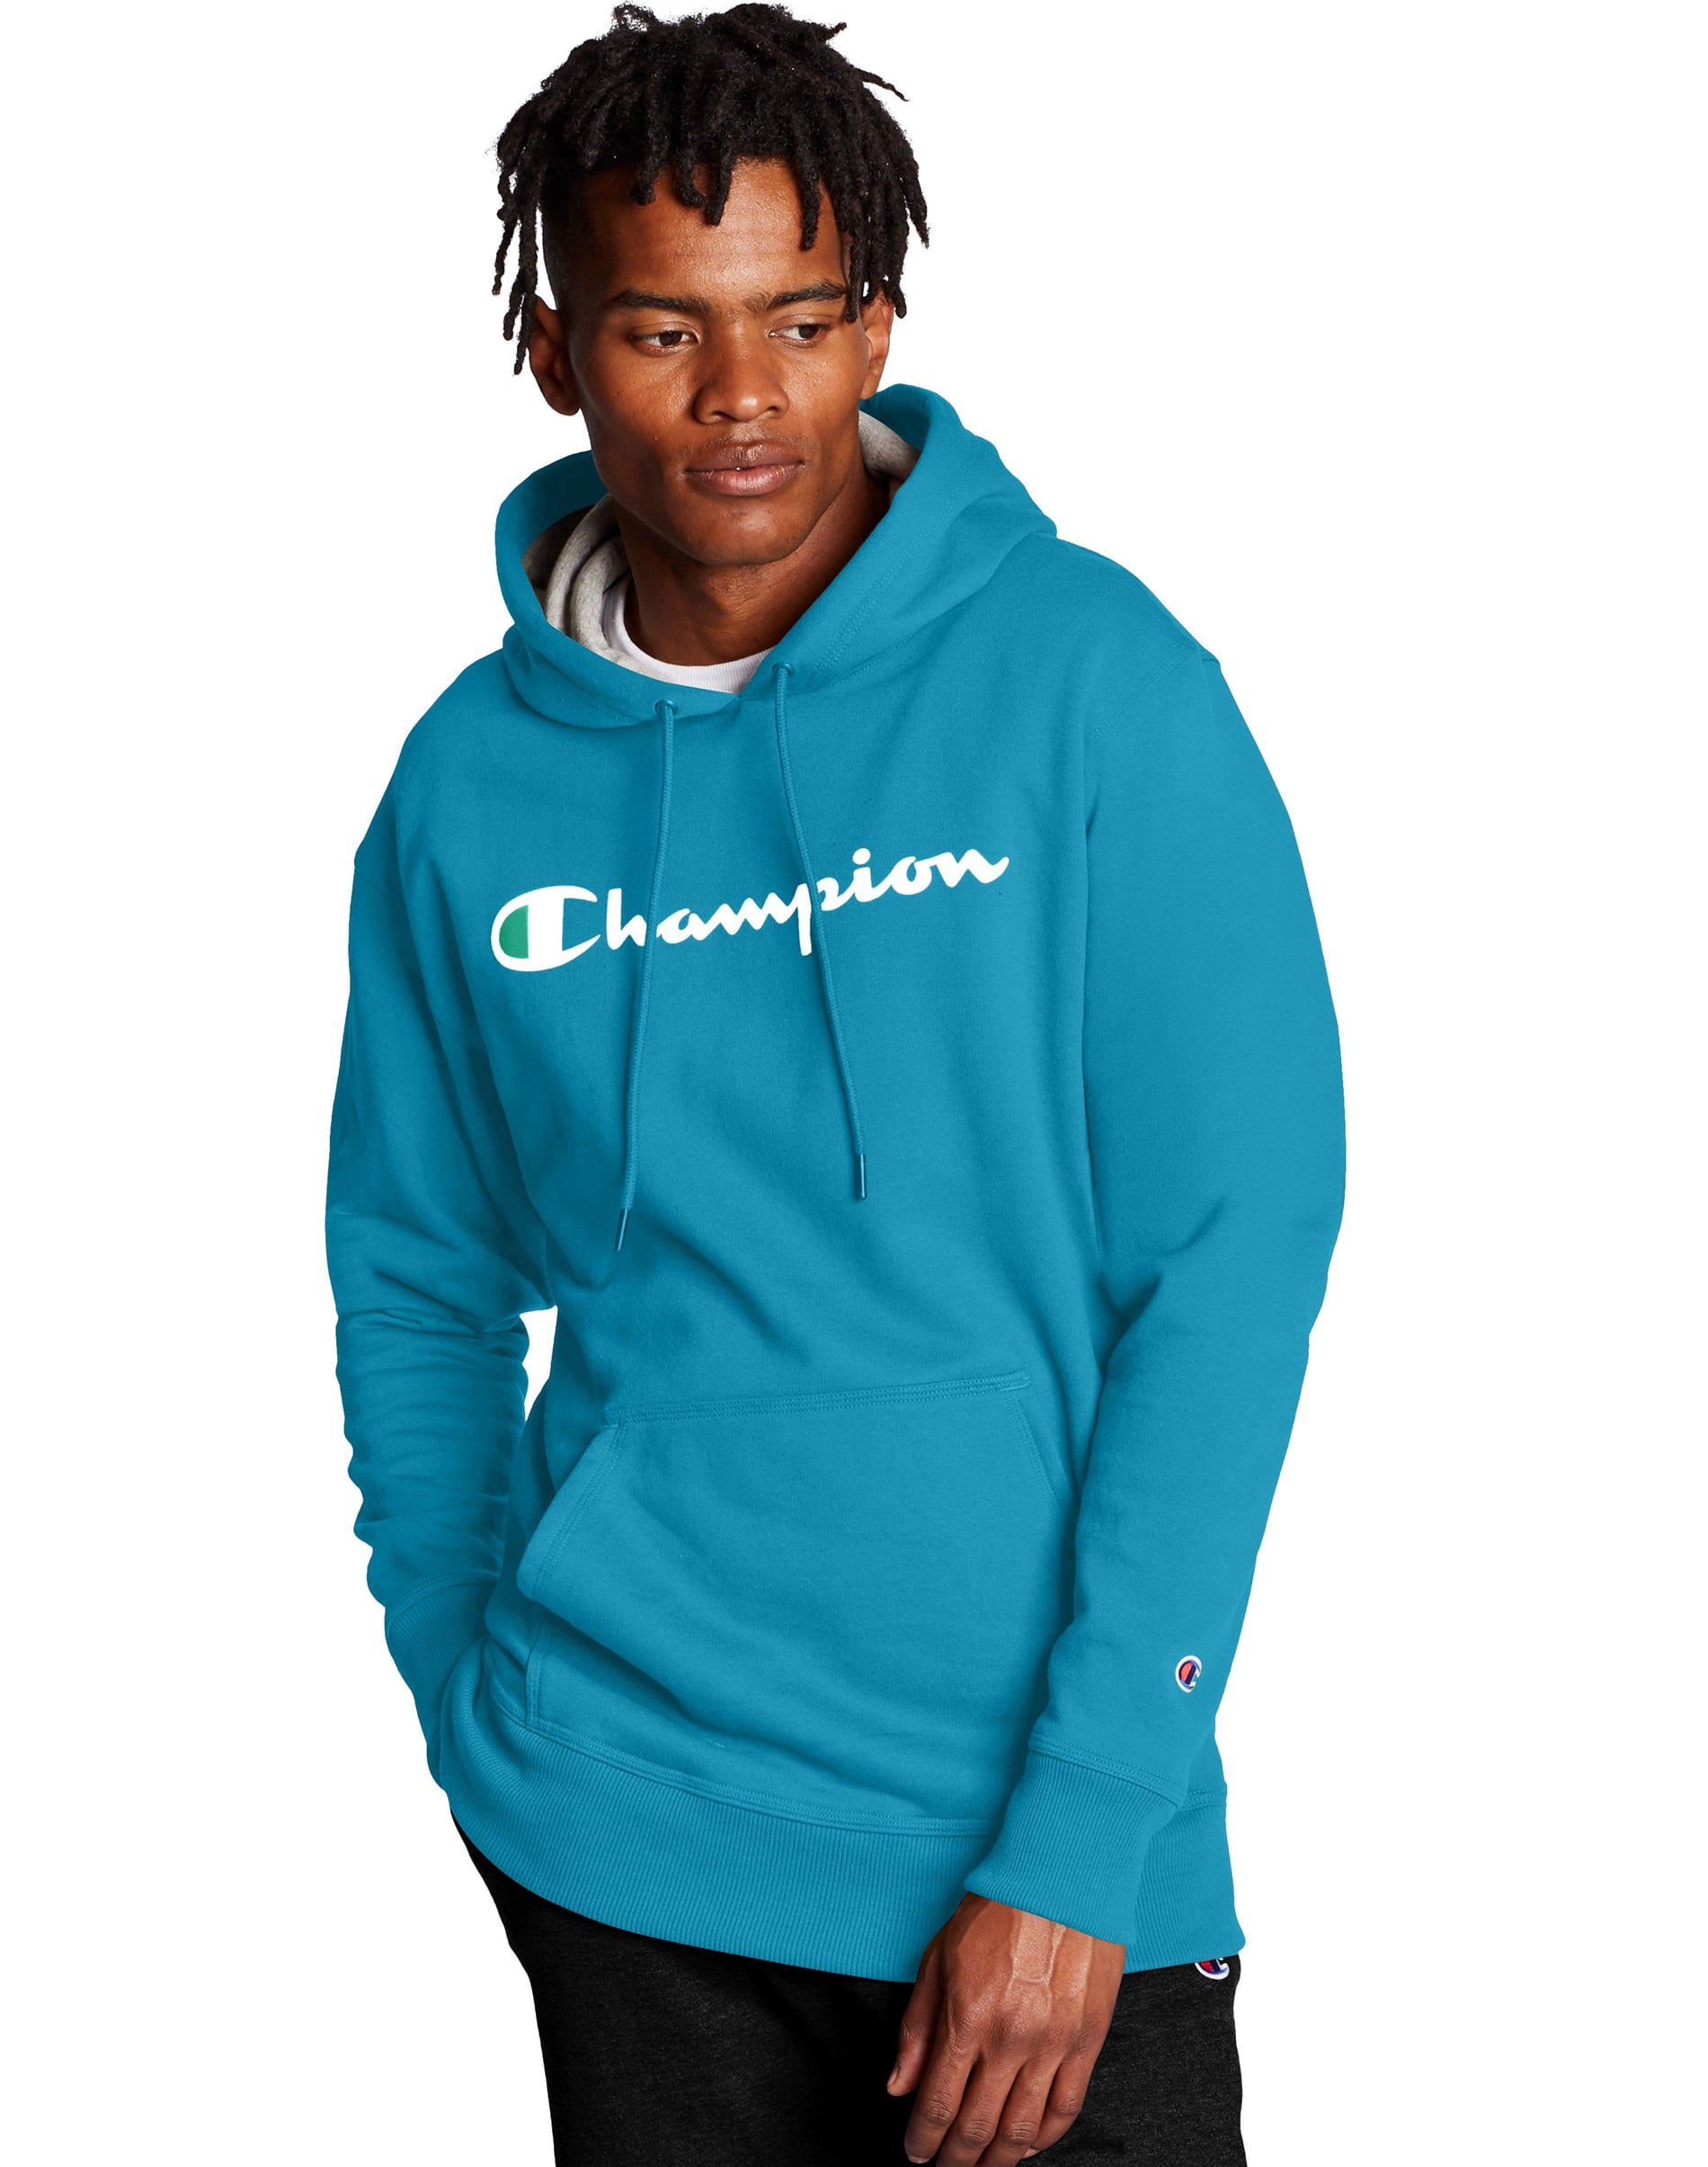 Best Friend A Pisces Will Change Your Life Champion Unisex Powerblend Hoodie